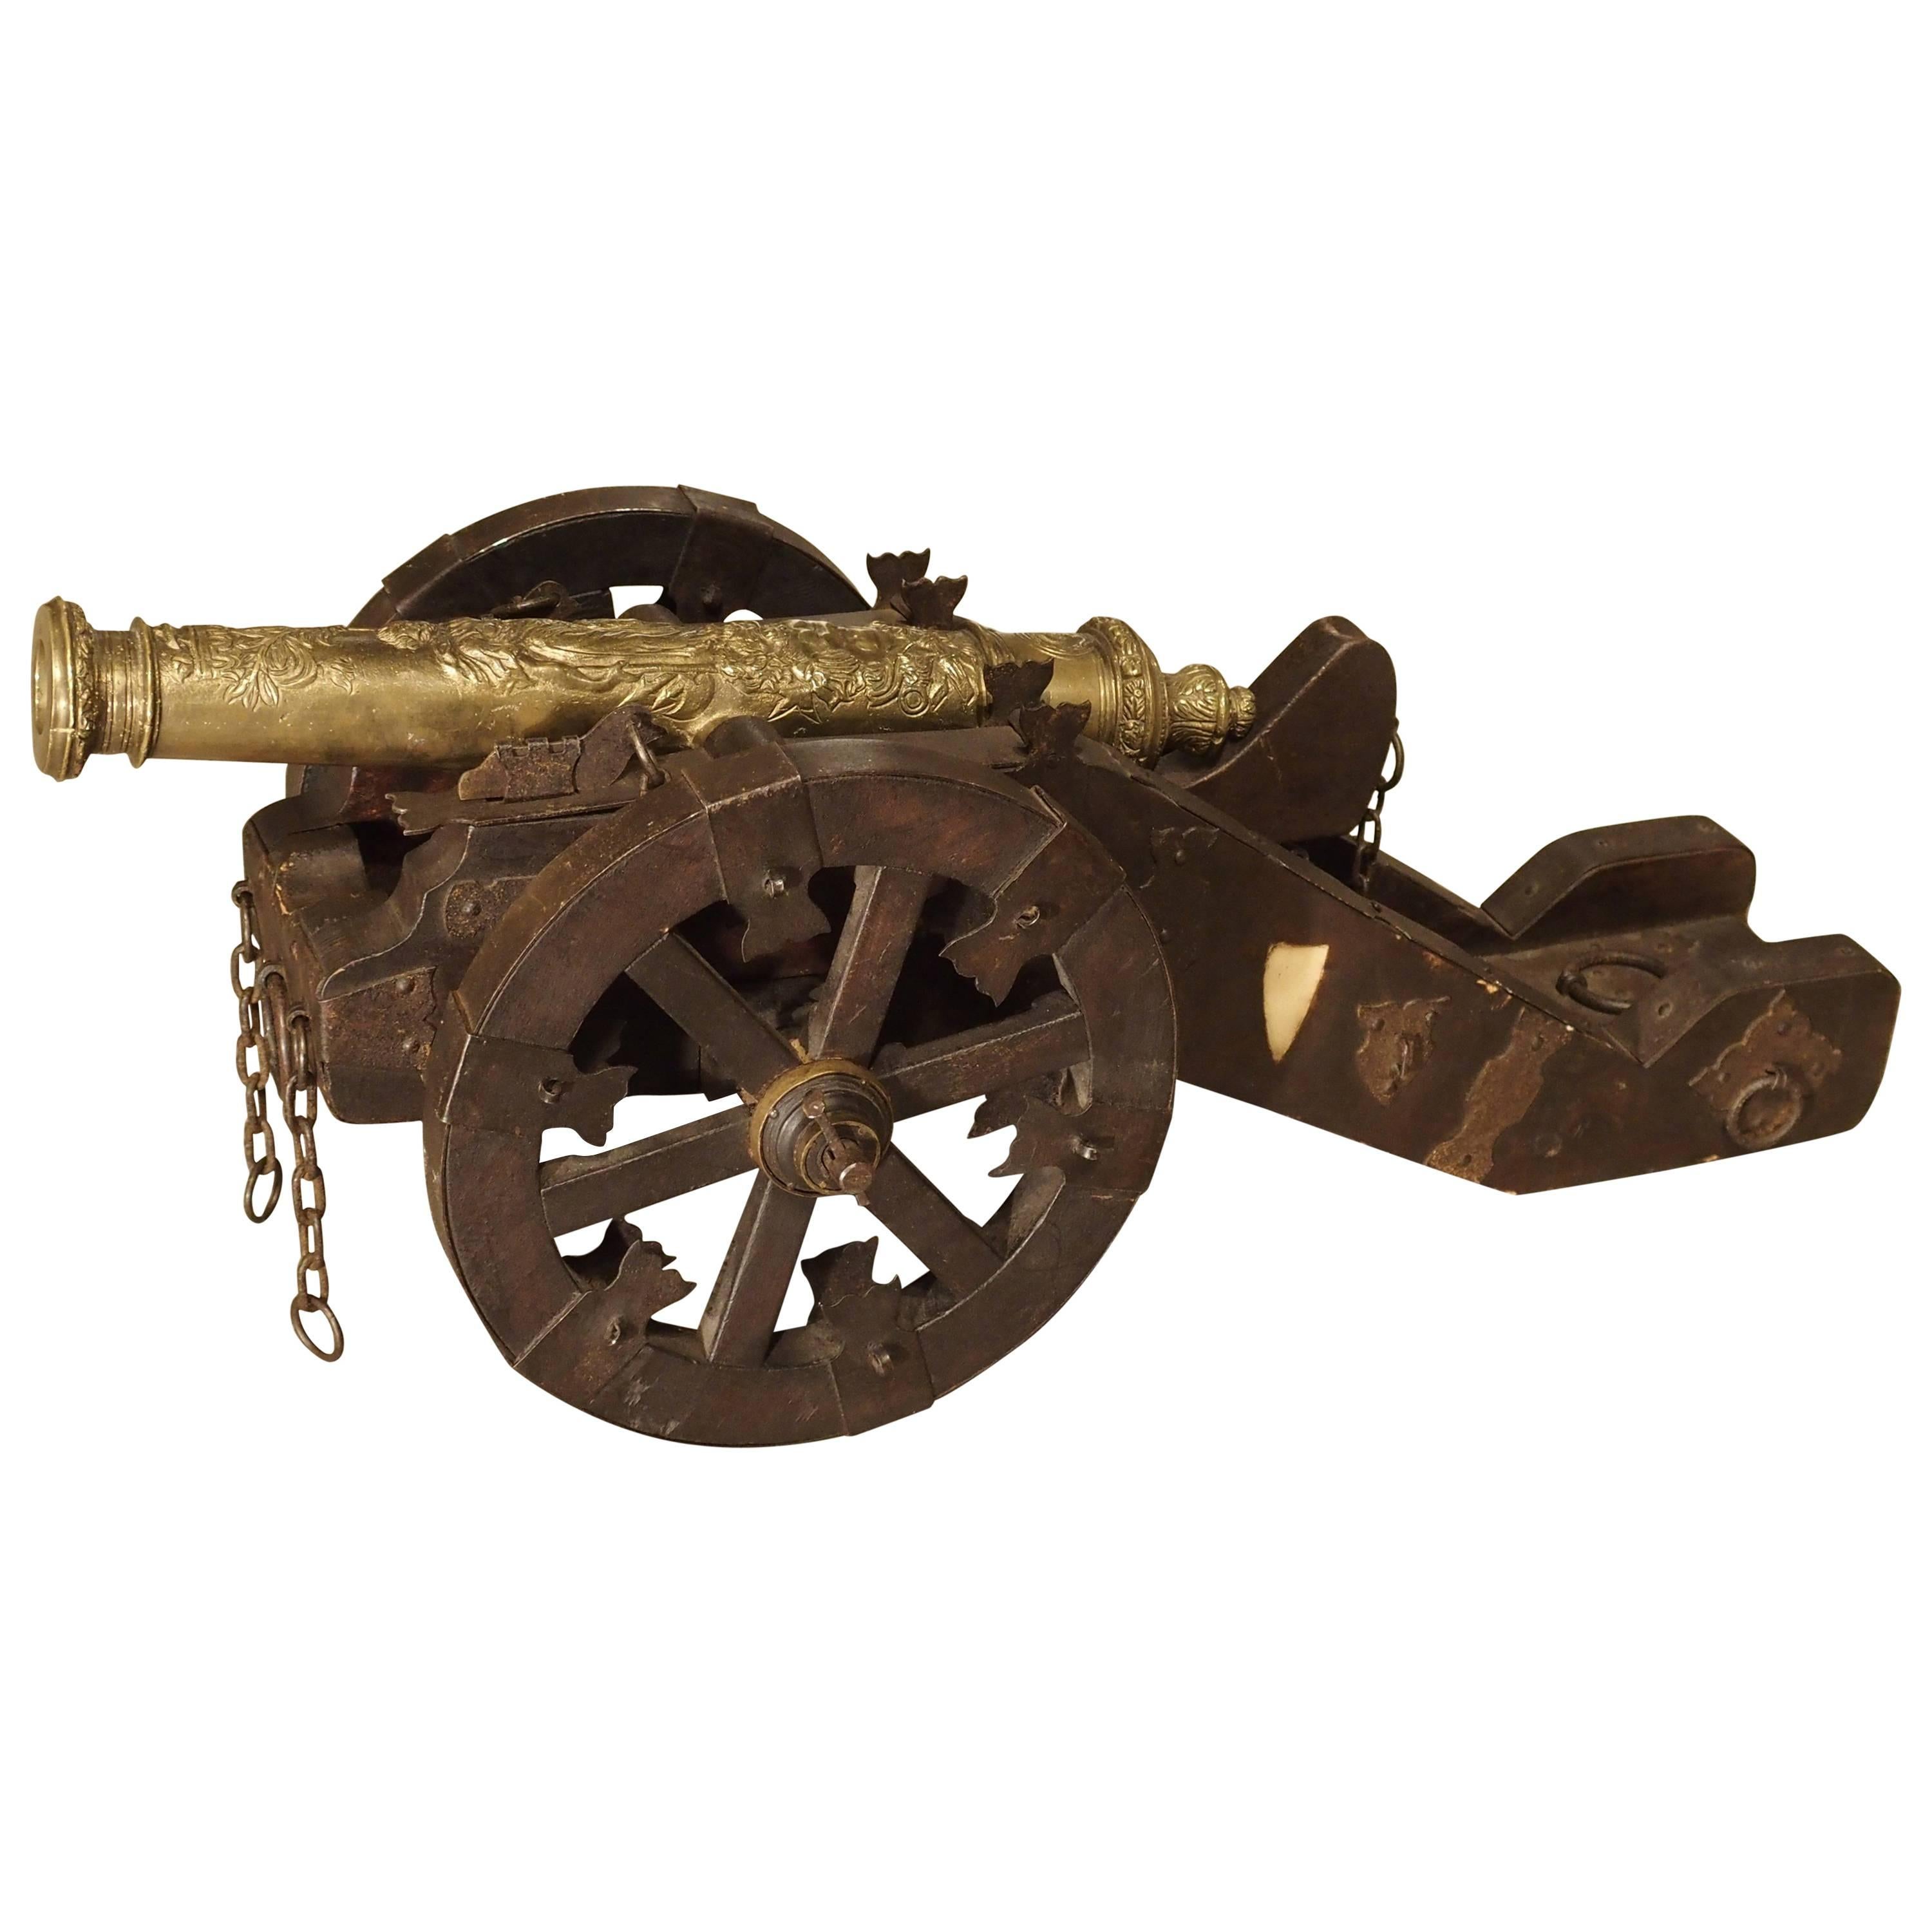 Iron, Wood, and Bronze Model of the Saint Barbara Cannon